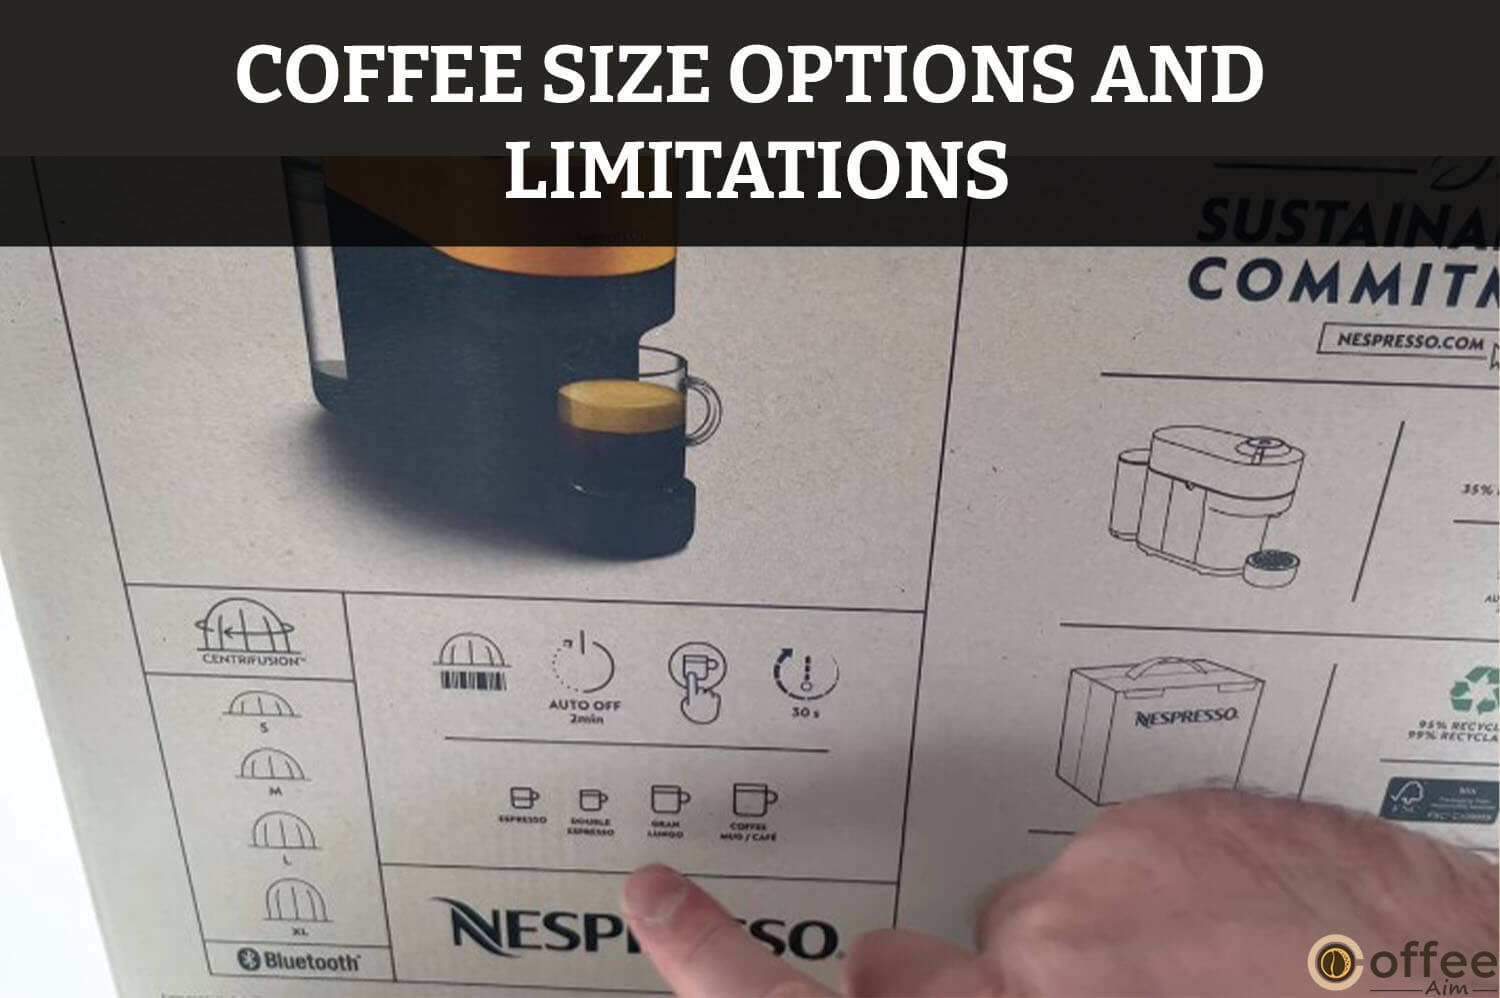 This image displays the "Coffee Size Options and Limitations" discussed in the article "Unboxing Nespresso Vertuo Pop+."